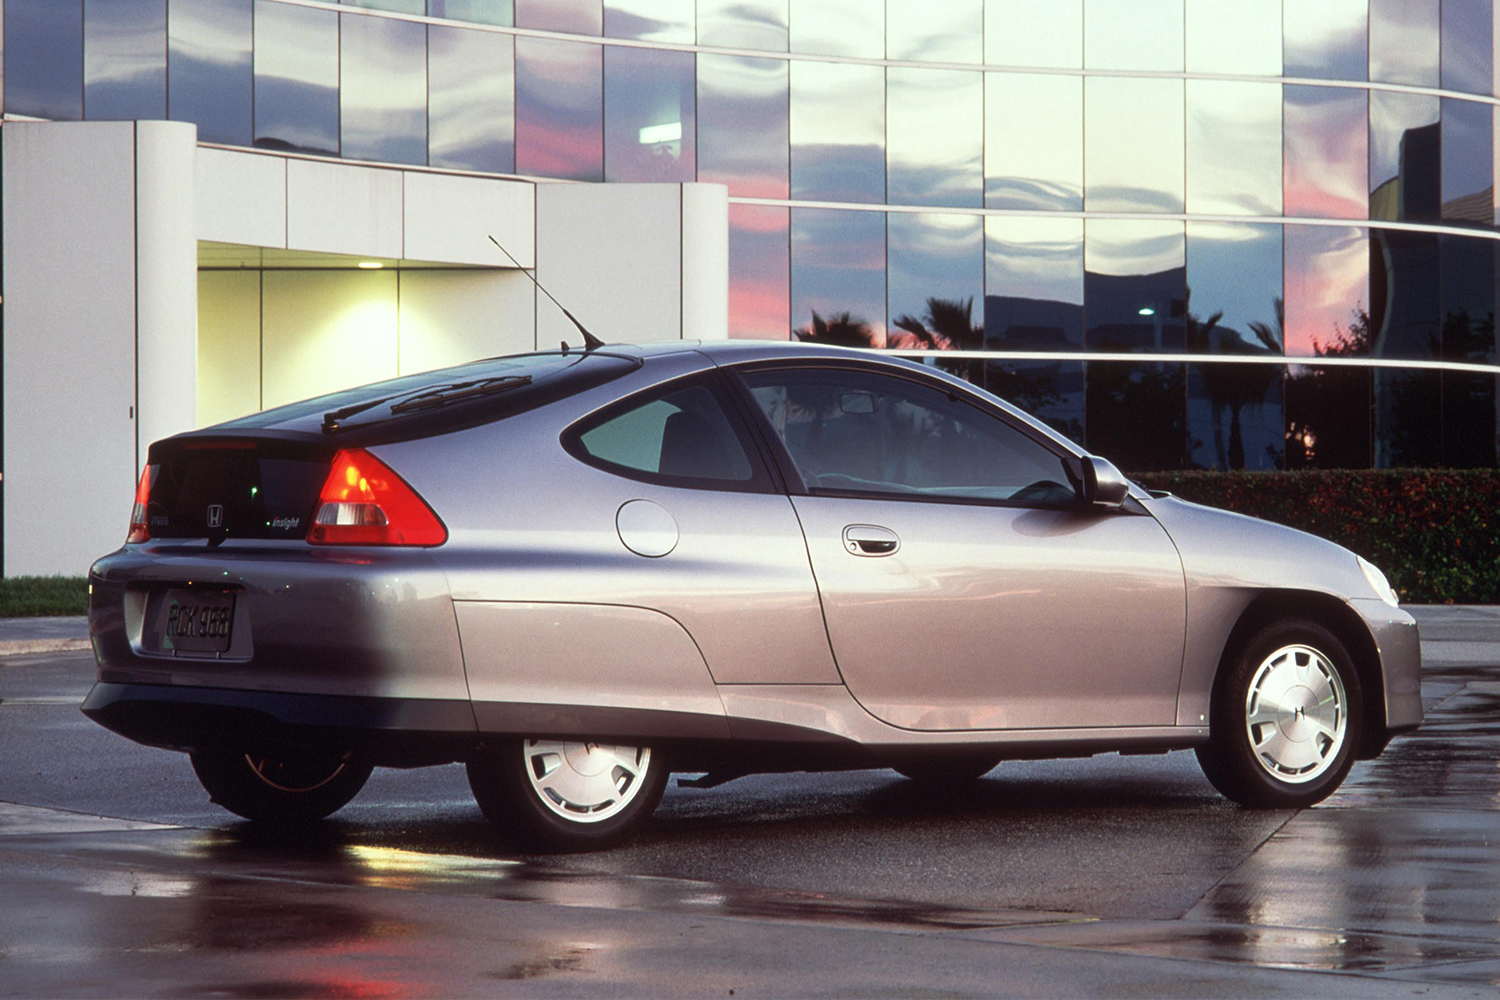 The back end of the 2000 Honda Insight hybrid in silver